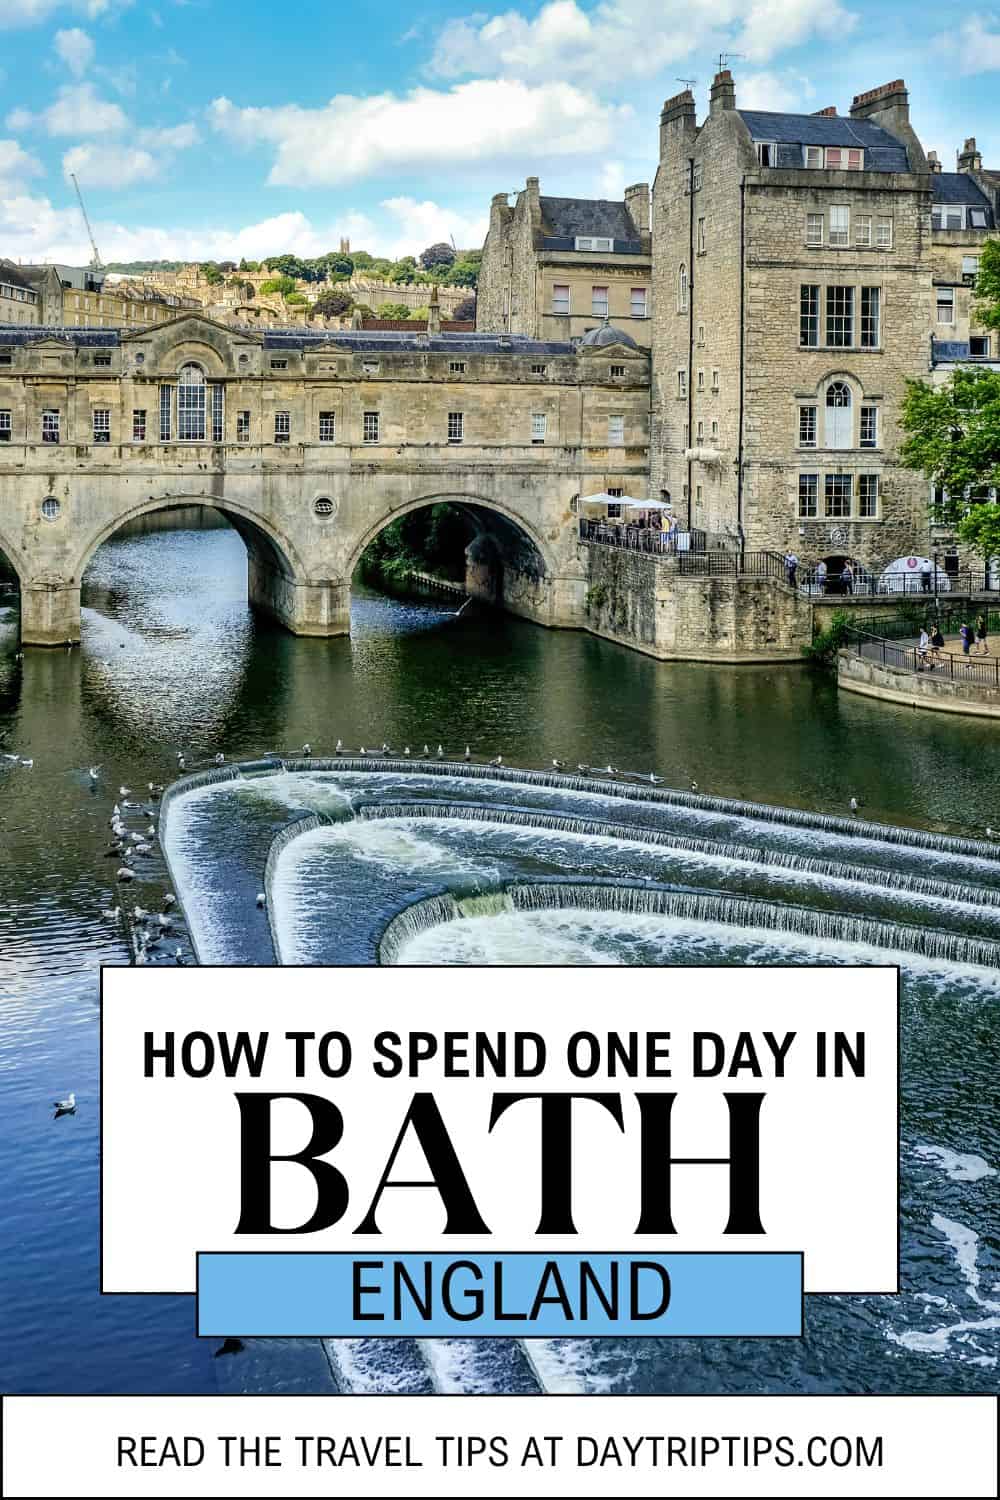 How to Spend One Day in Bath England